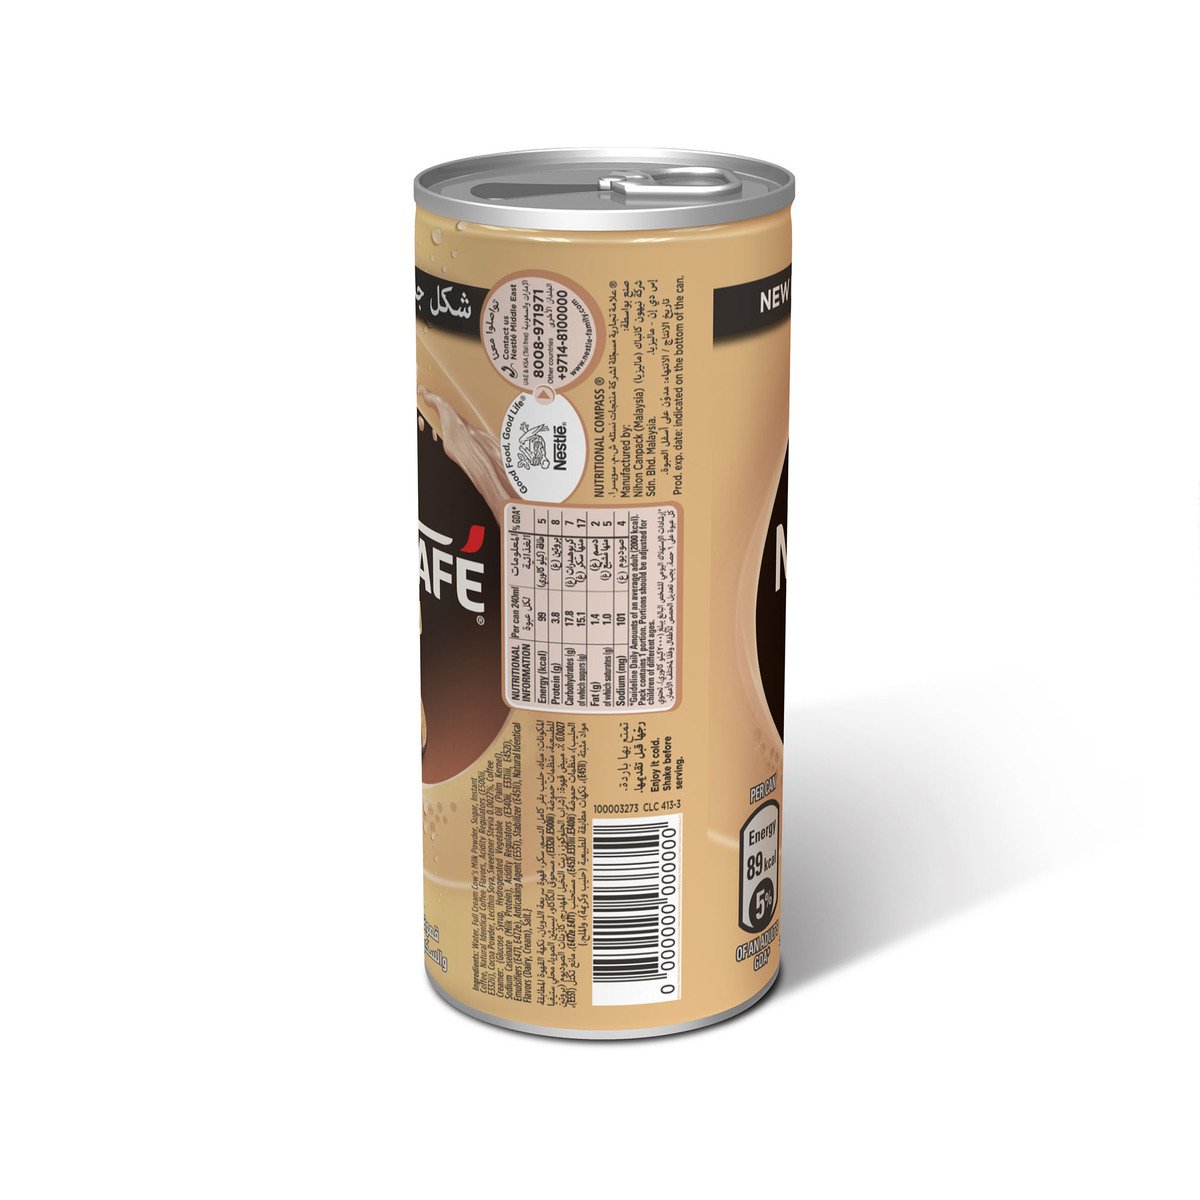 Nescafe Ready to Drink Latte Chilled Coffee 6 x 240 ml